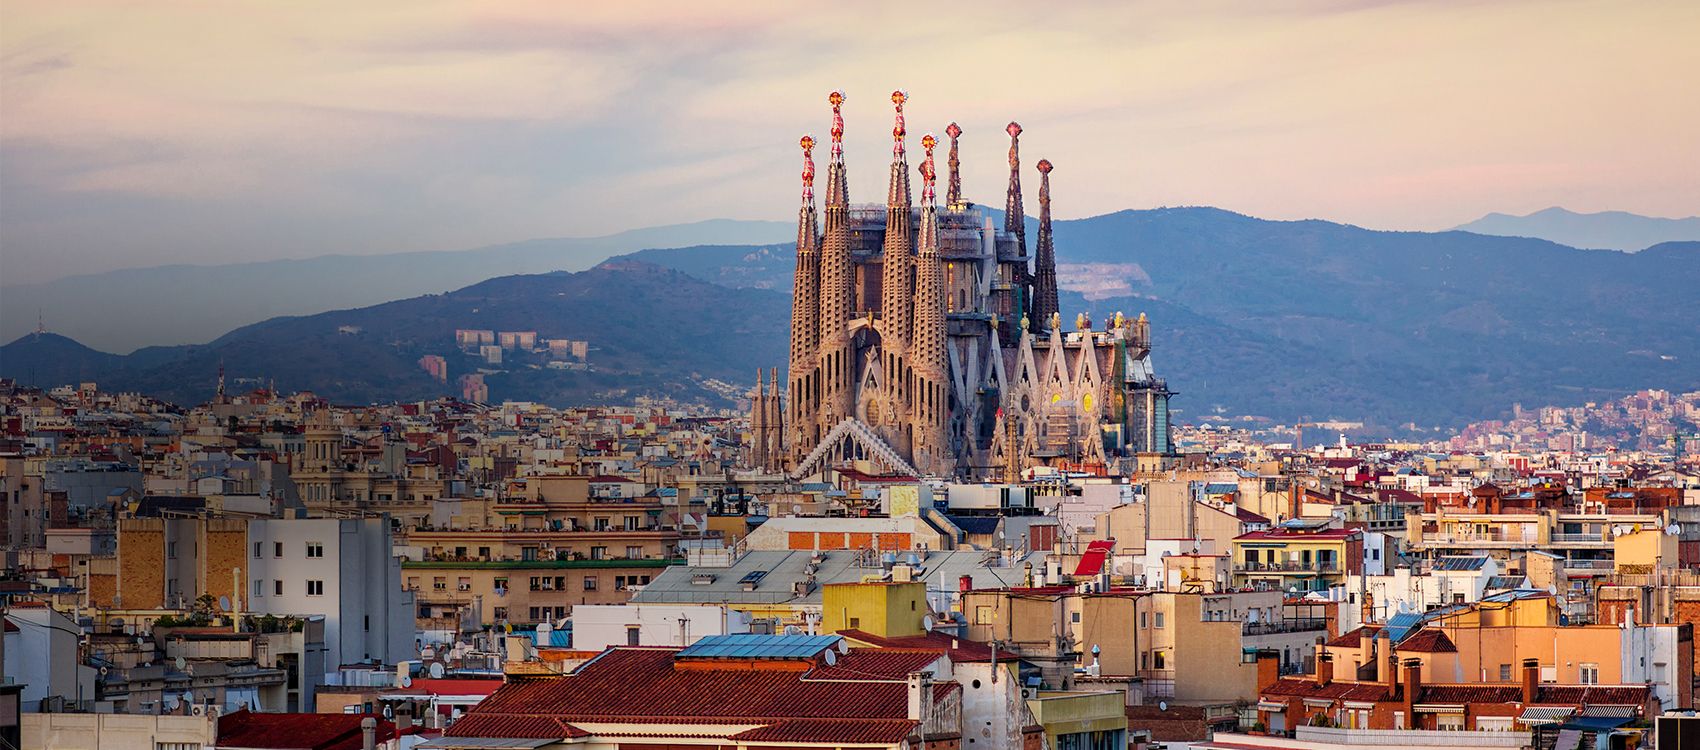 The Complete Budget Travel Guide to Barcelona - TripHound